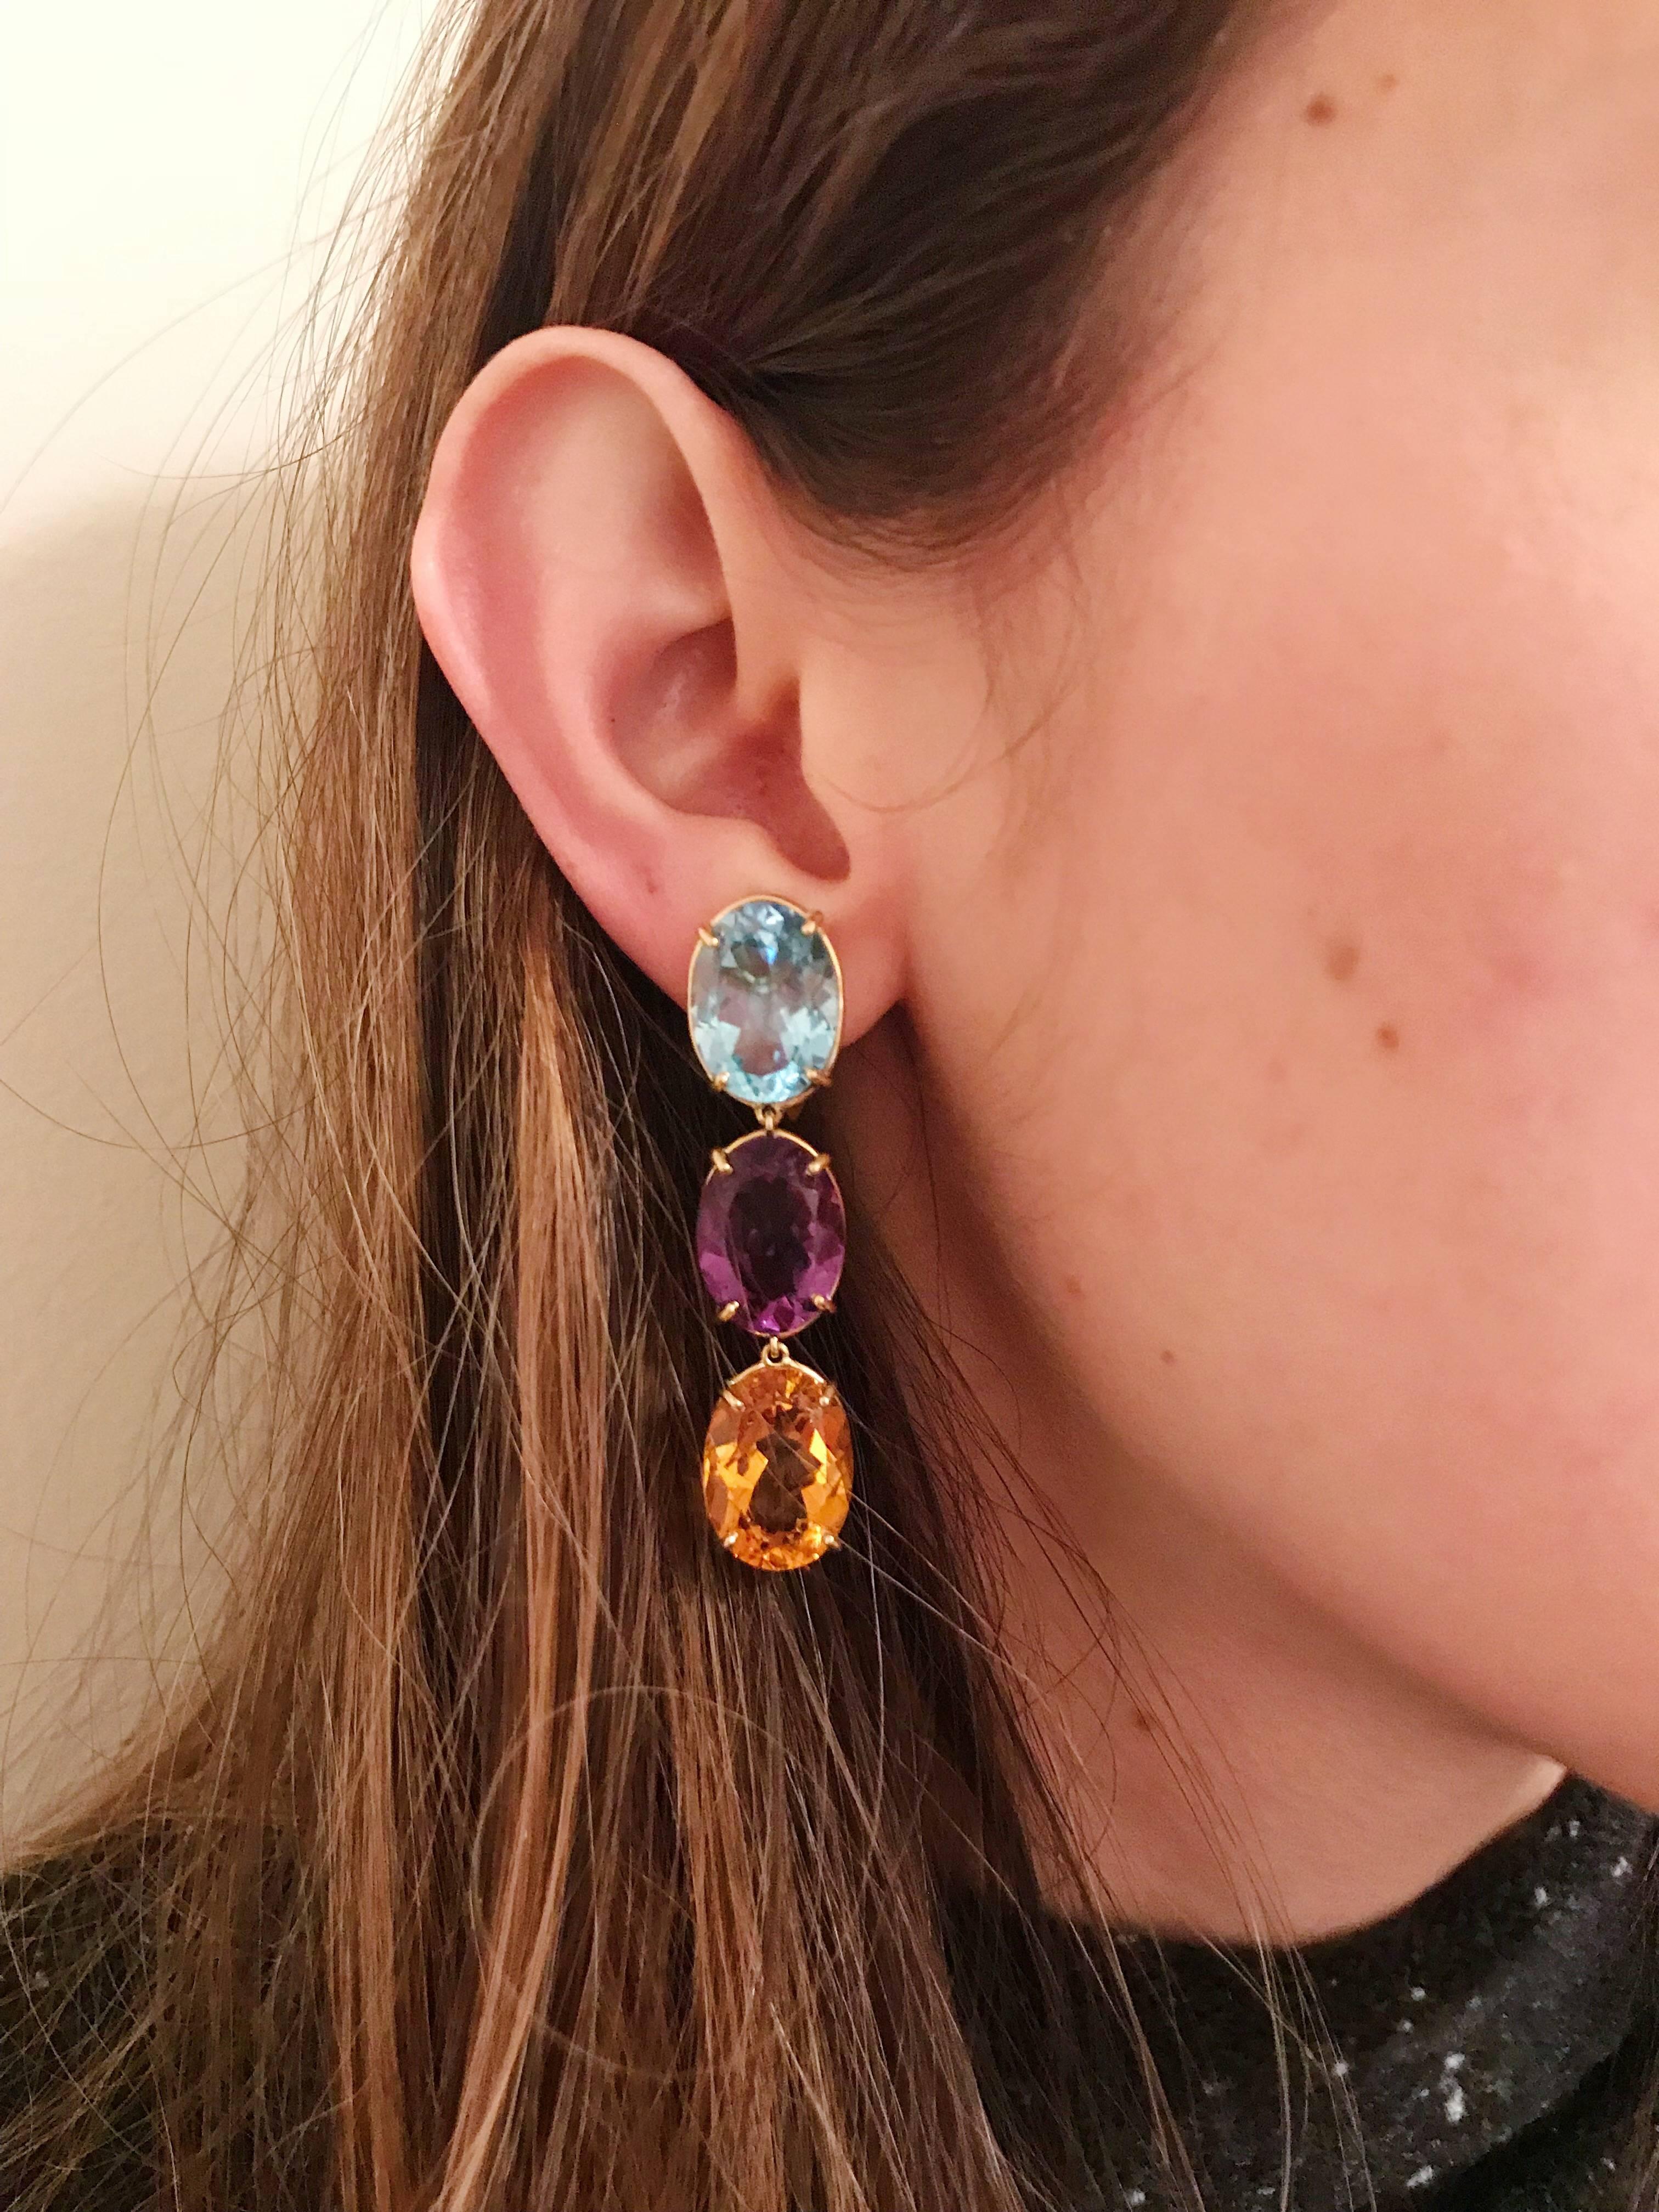 18kt Yellow Gold Elegant Three stone Drop Earrings with faceted oval Blue Topaz, Amethyst and Citrine.  

The Earrings measure  2 1/4 in length.

The earrings can be made for Clip Earring or Pierced Earrings.

They can also be custom made with and